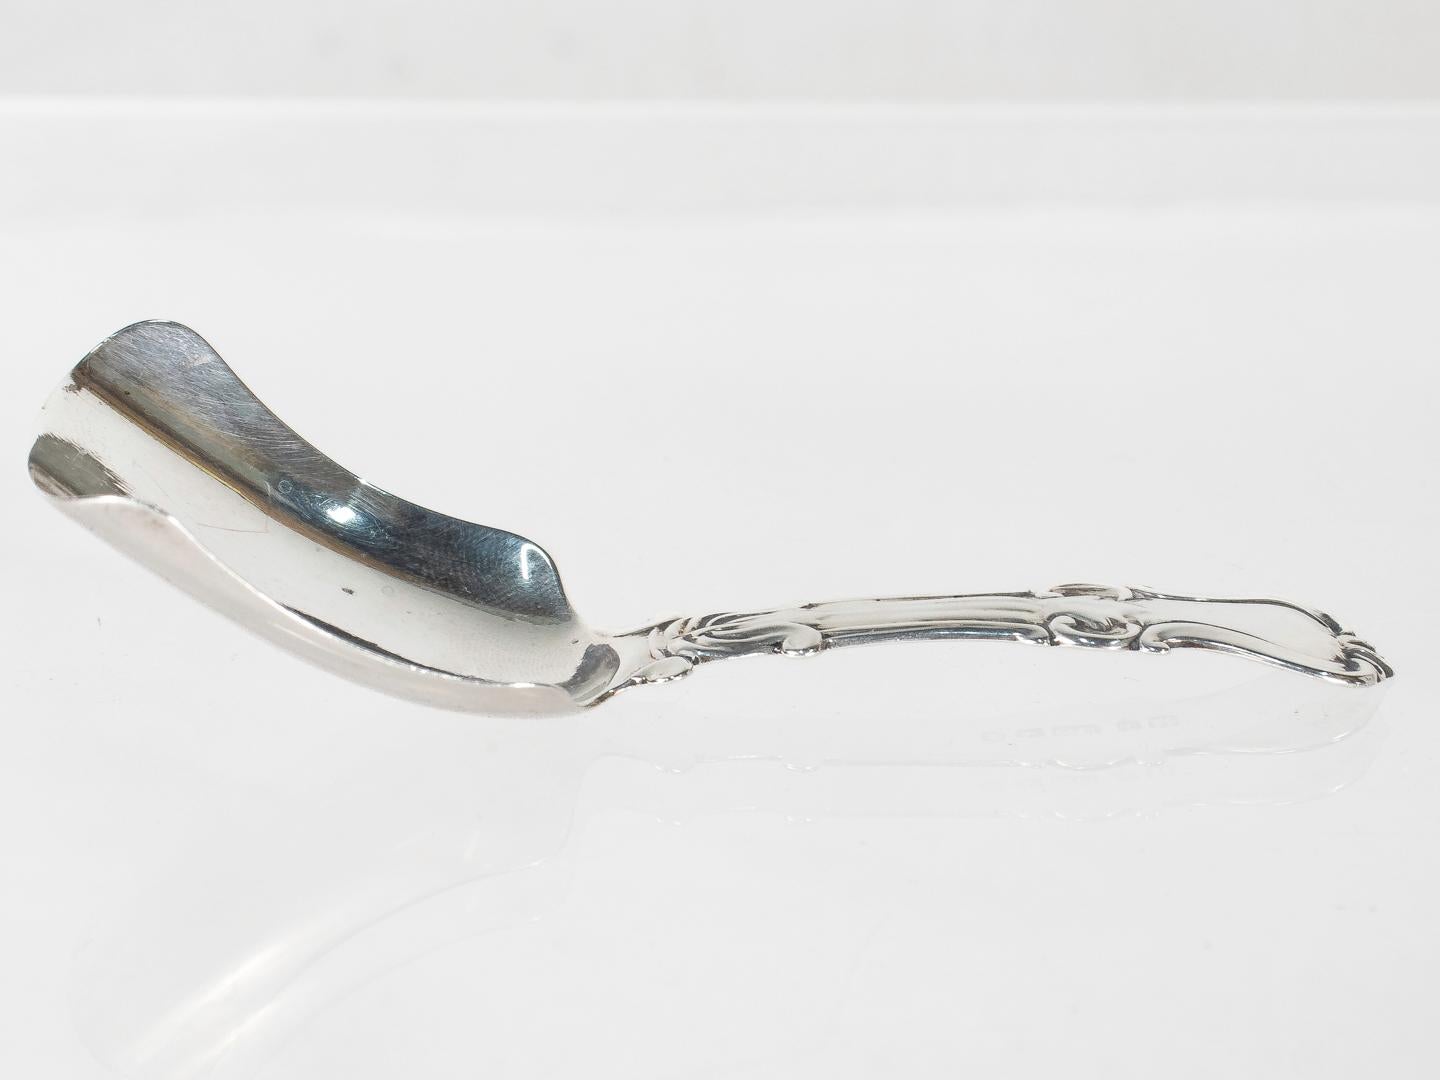 A fine early Victorian tea caddy spoon.

In sterling silver.

With a shovel shaped bowl and a scrolled handle. 

By George Unite of Birmingham, England in 1840.

Simply a wonderful sterling tea accessory from early in the Victorian